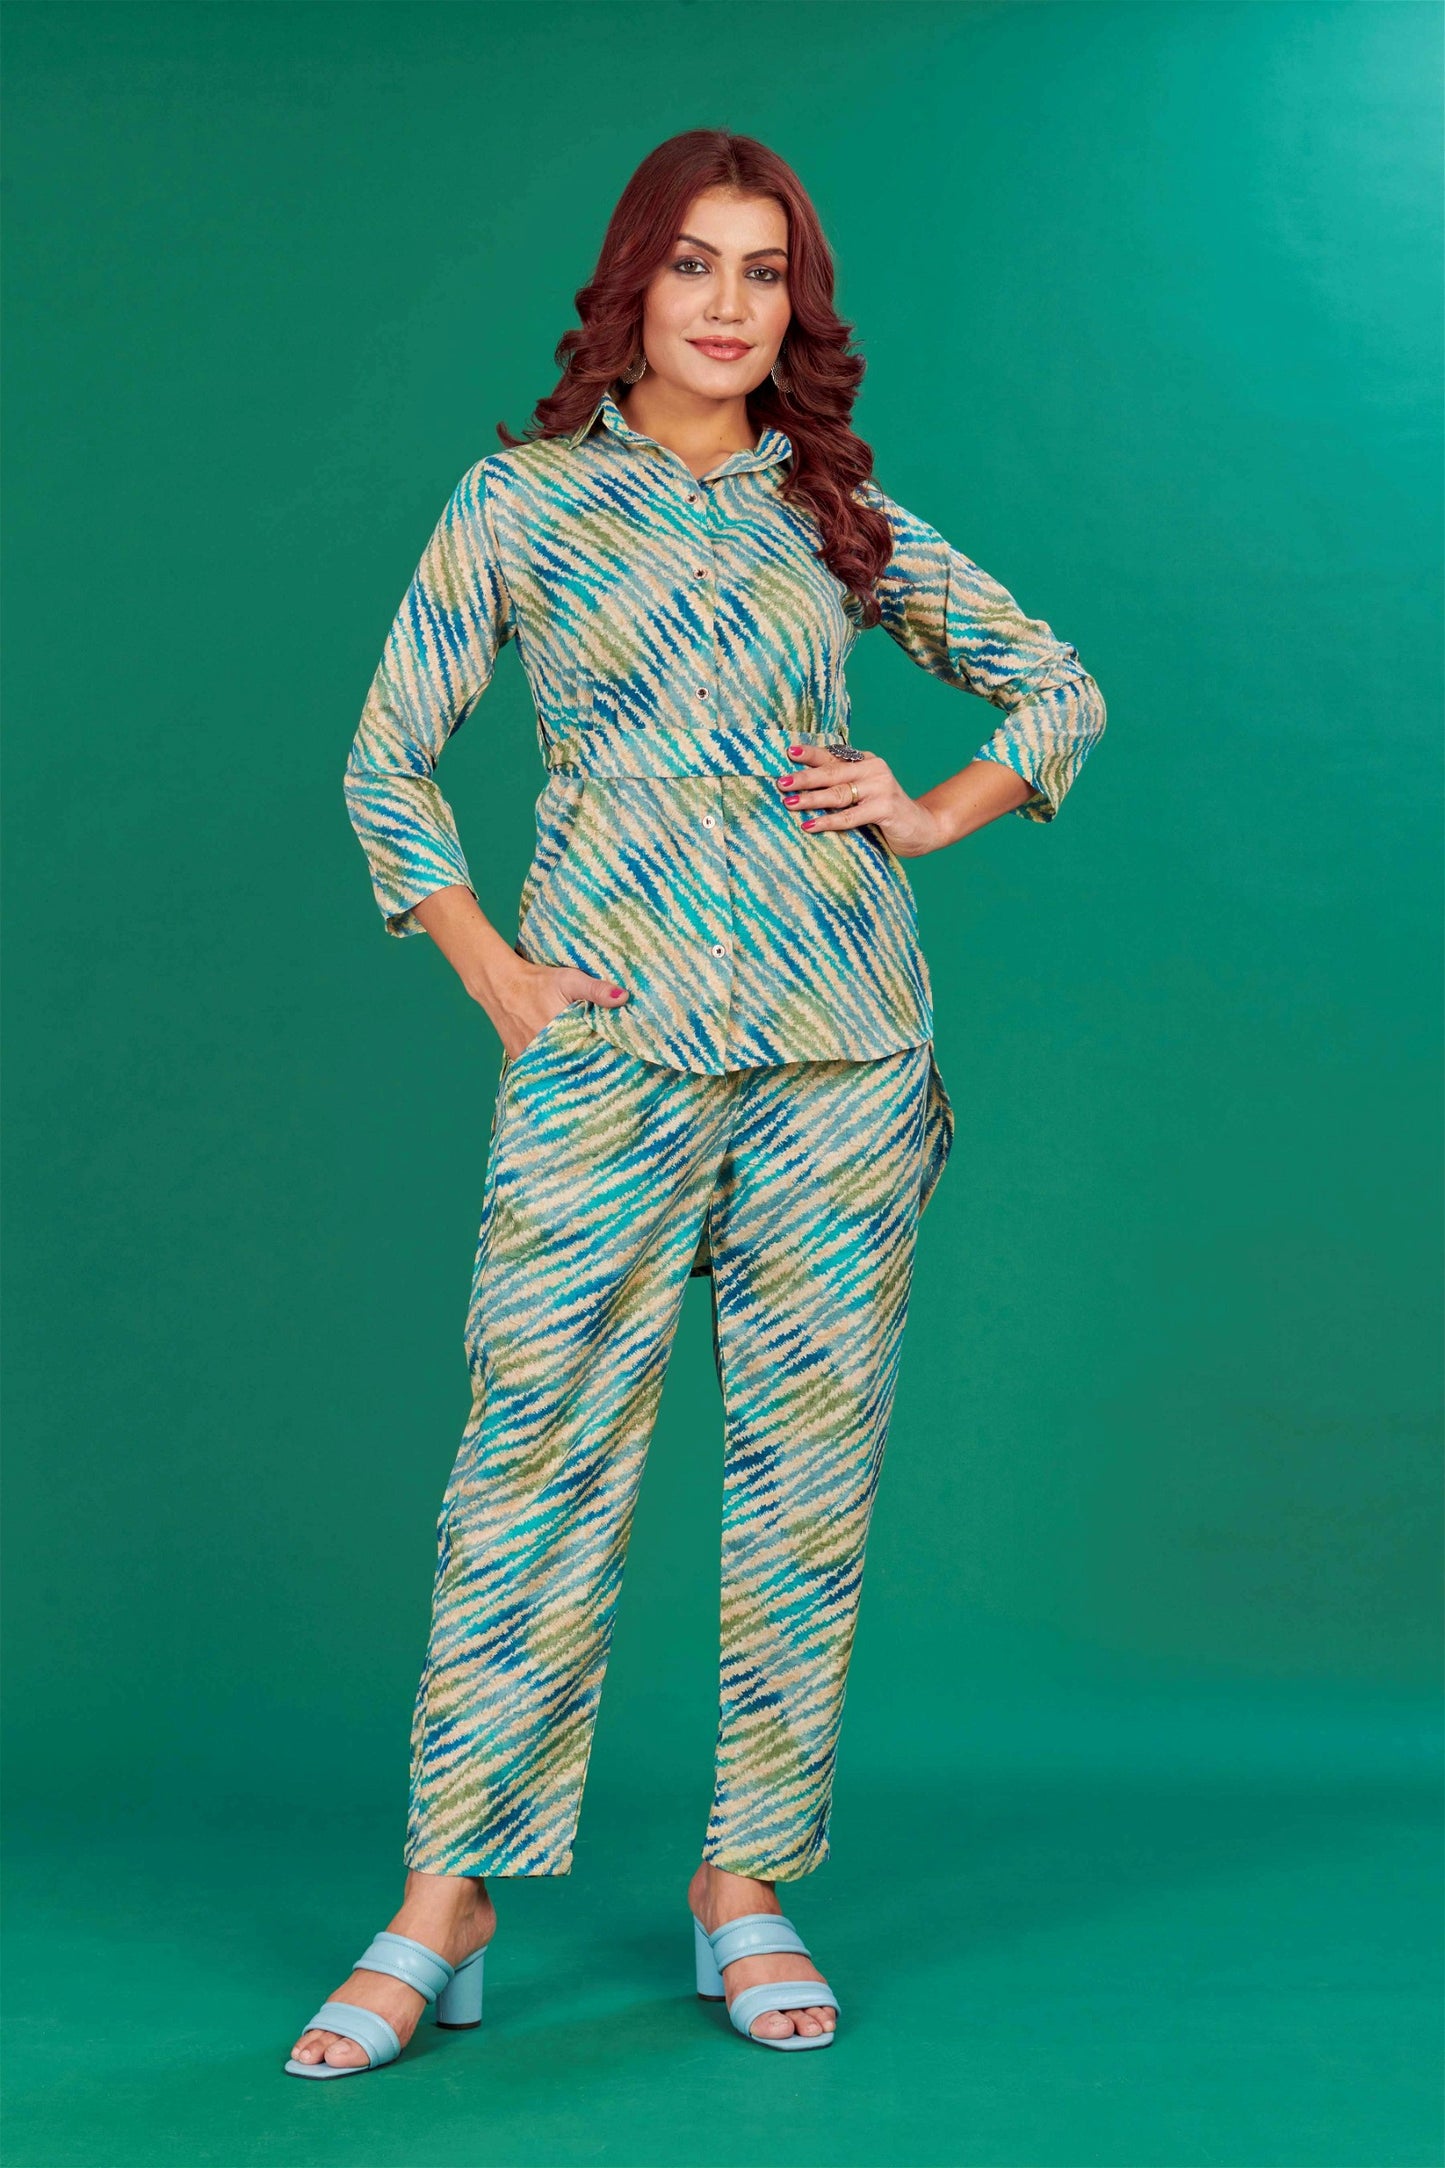 The model in the image is wearing Teal Cotton Party Wear Co-ords Set from Alice Milan. Crafted with the finest materials and impeccable attention to detail, the  looks premium, trendy, luxurious and offers unparalleled comfort. It’s a perfect clothing option for loungewear, resort wear, party wear or for an airport look. The woman in the image looks happy, and confident with her style statement putting a happy smile on her face.